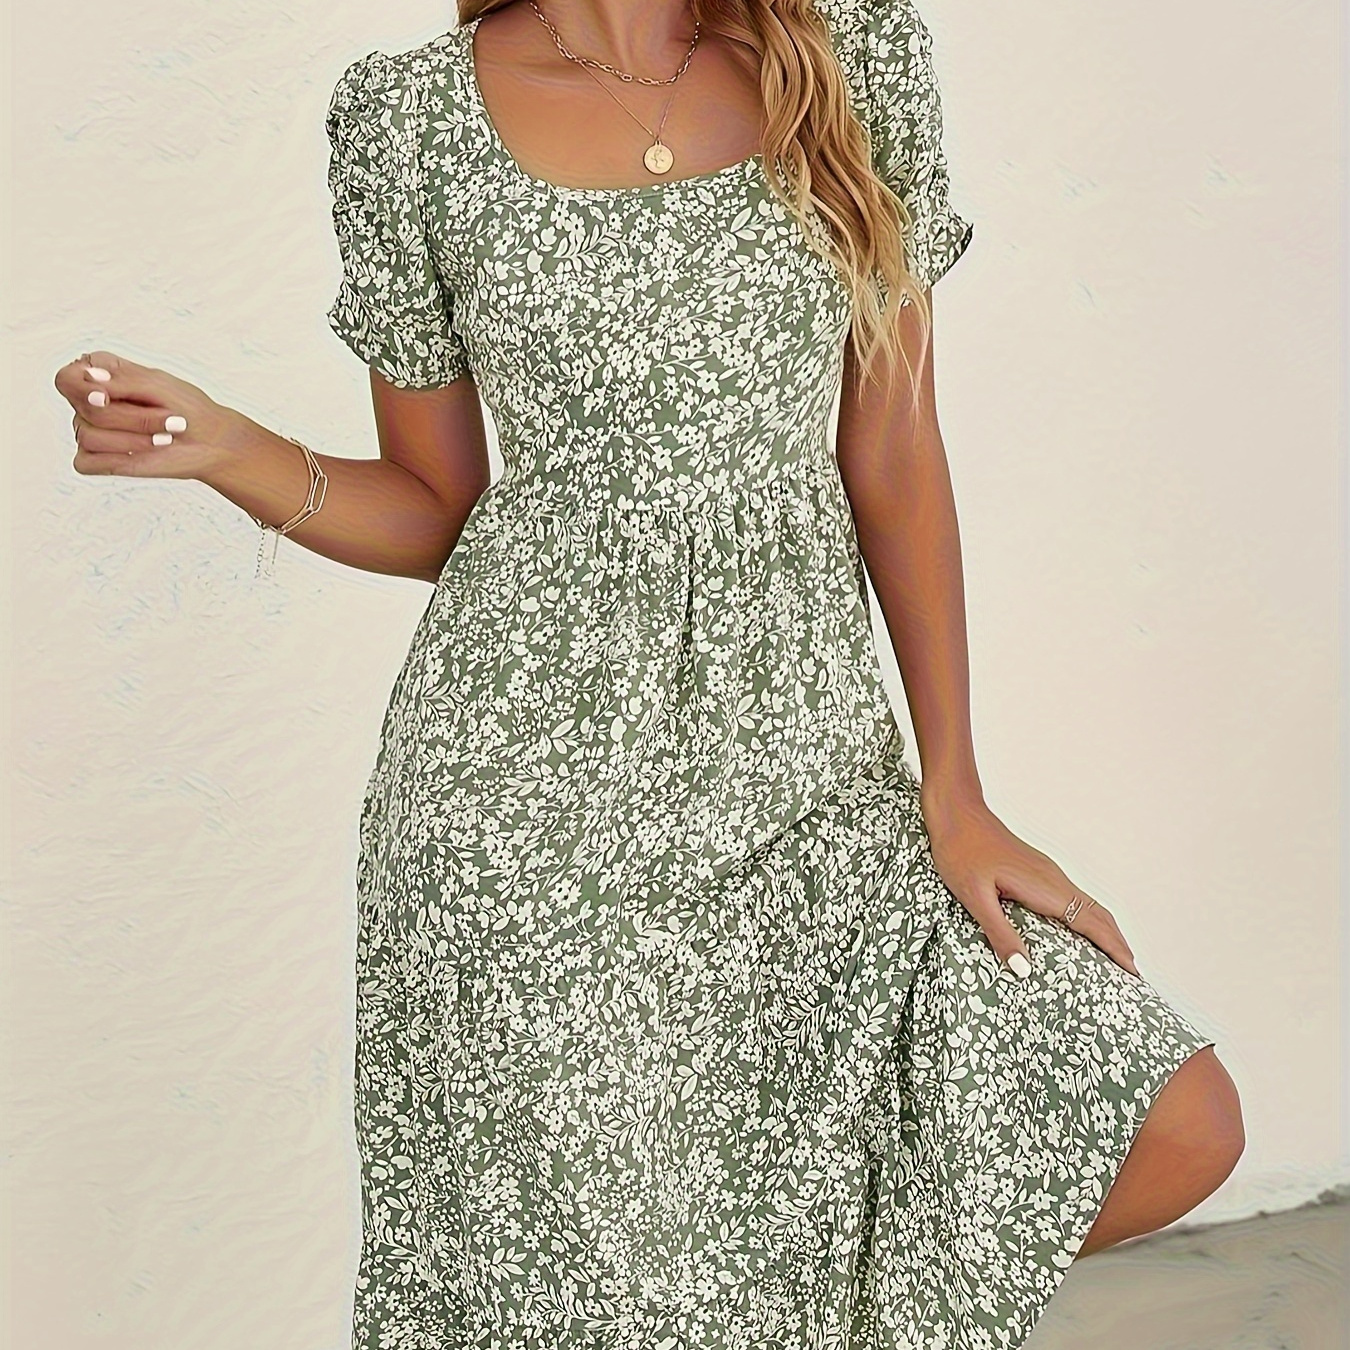 

Floral Print Square Neck Dress, Casual Short Sleeve Ruched Dress For Spring & Summer, Women's Clothing